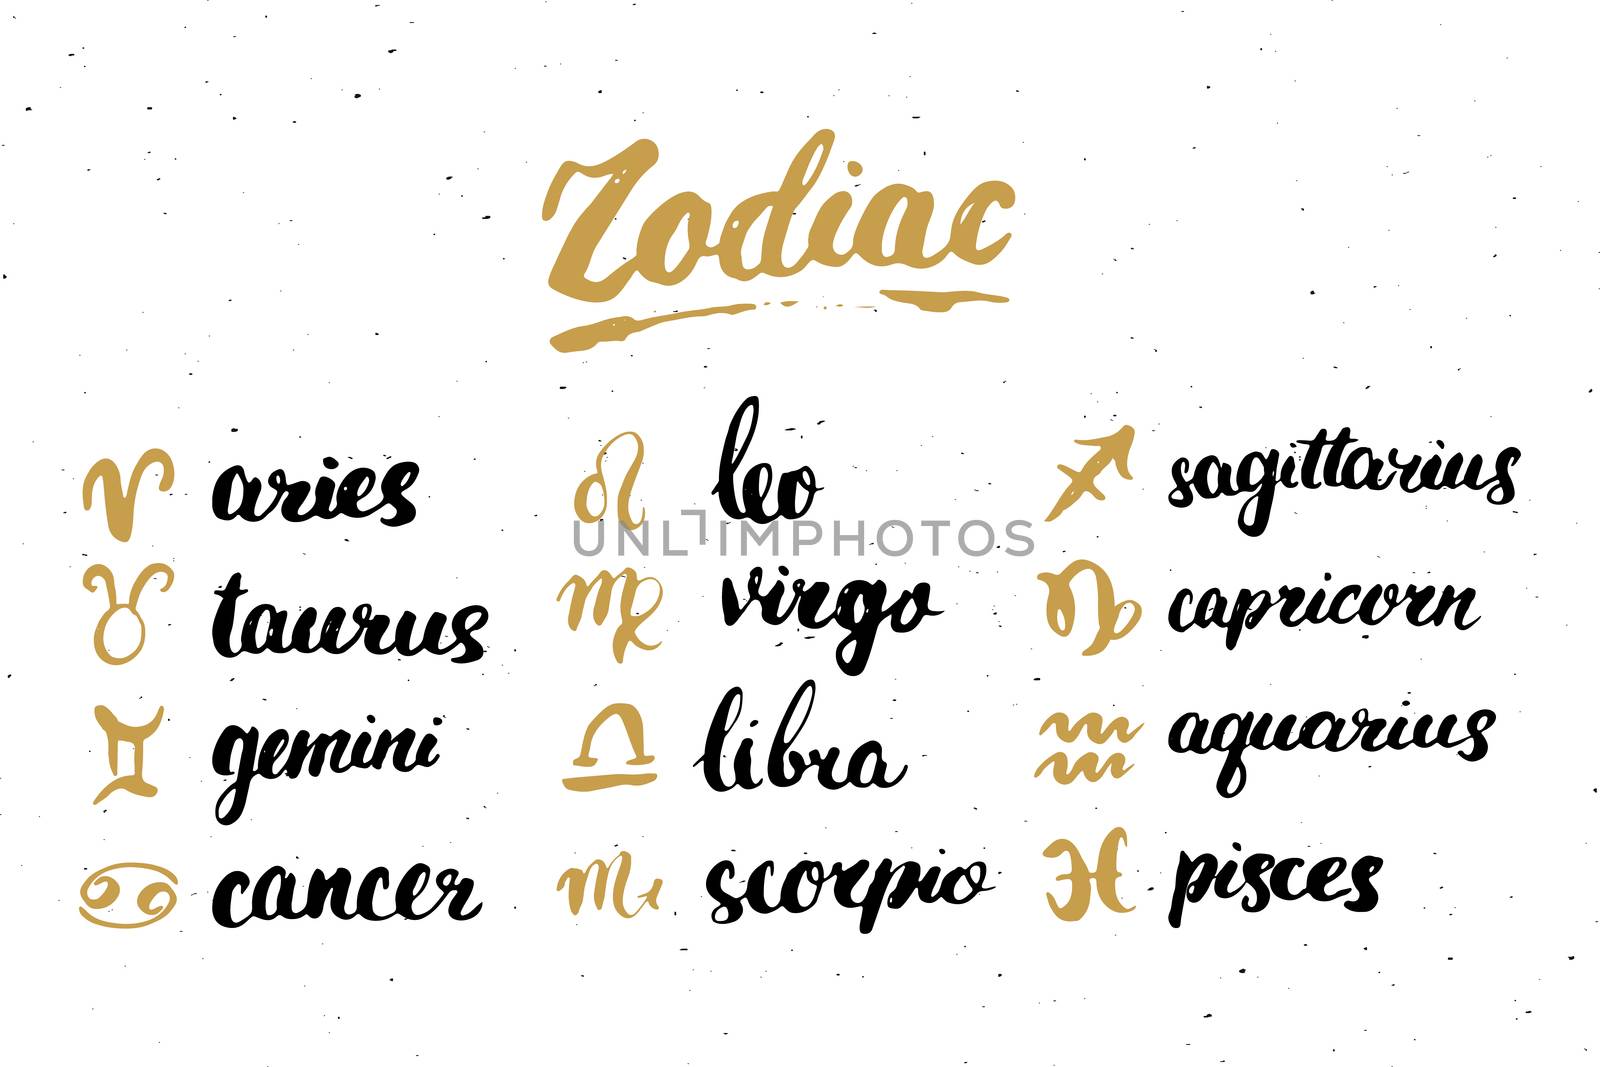 Zodiac signs set and letterings. Hand drawn horoscope astrology symbols, grunge textured design, typography print, vector illustration by Lemon_workshop